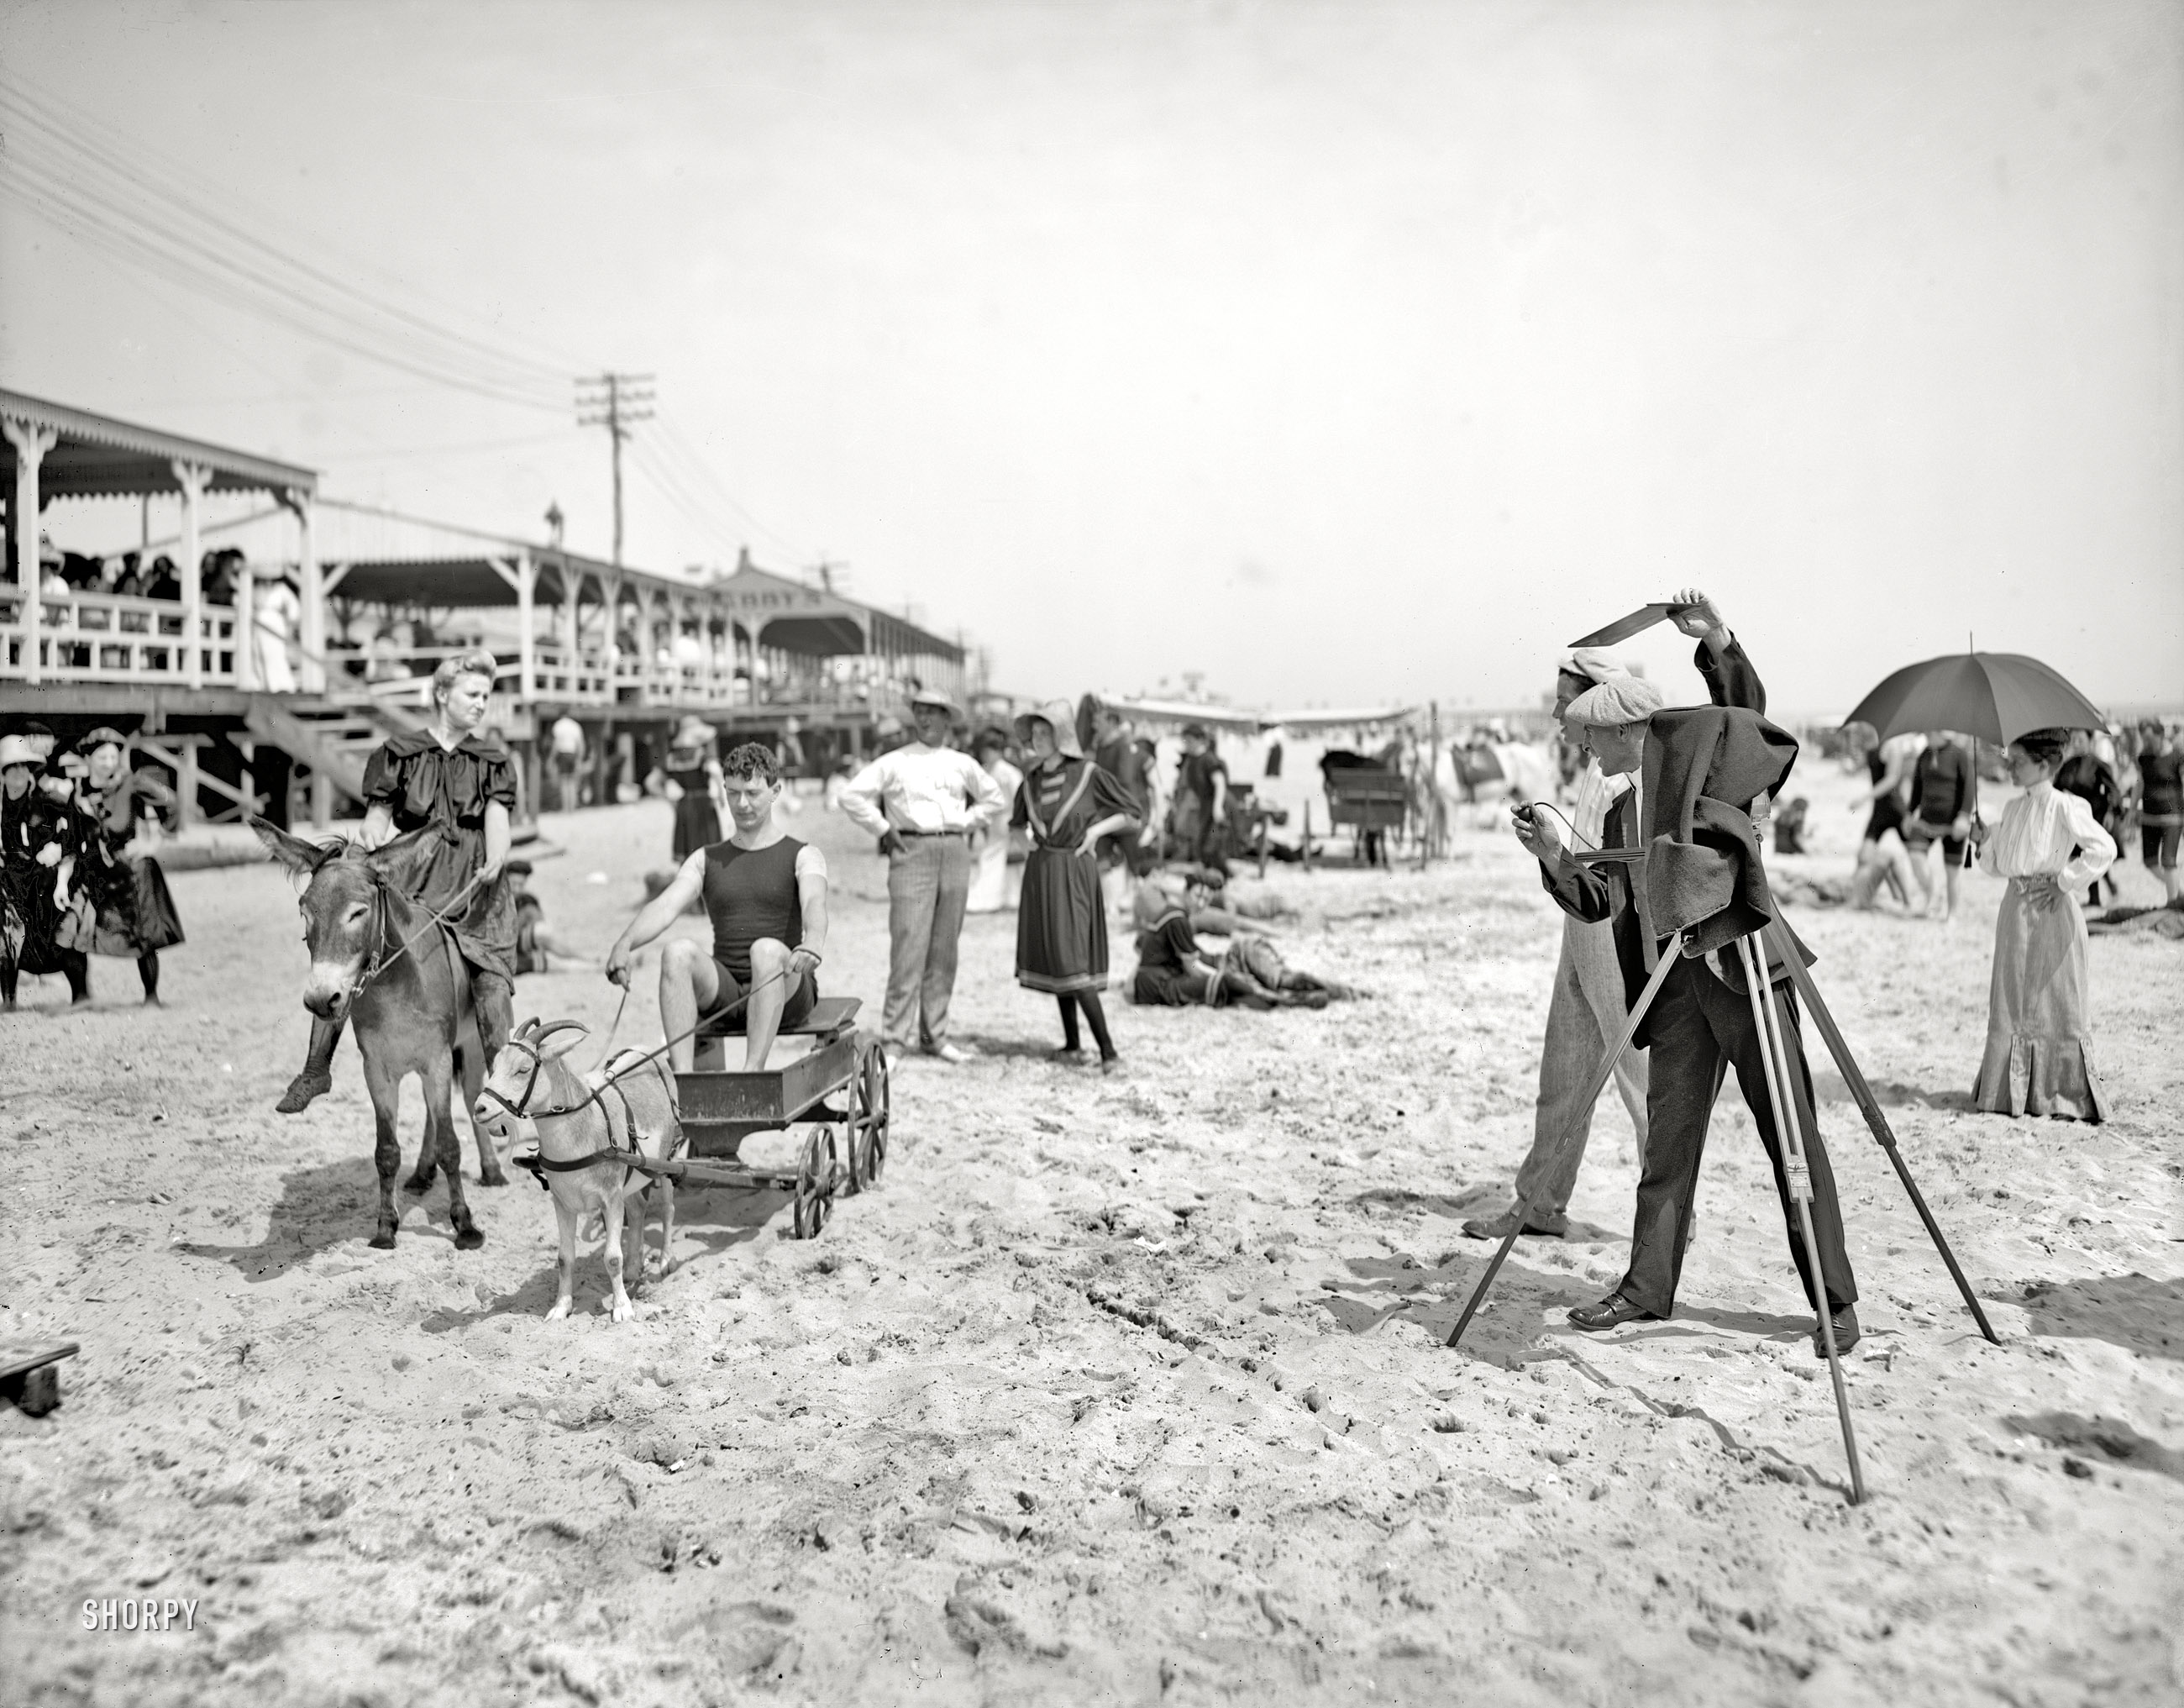 St. Augustine, Florida, circa 1905. "They were on their honeymoon." 8x10 inch dry plate glass negative, Detroit Publishing Company. View full size.